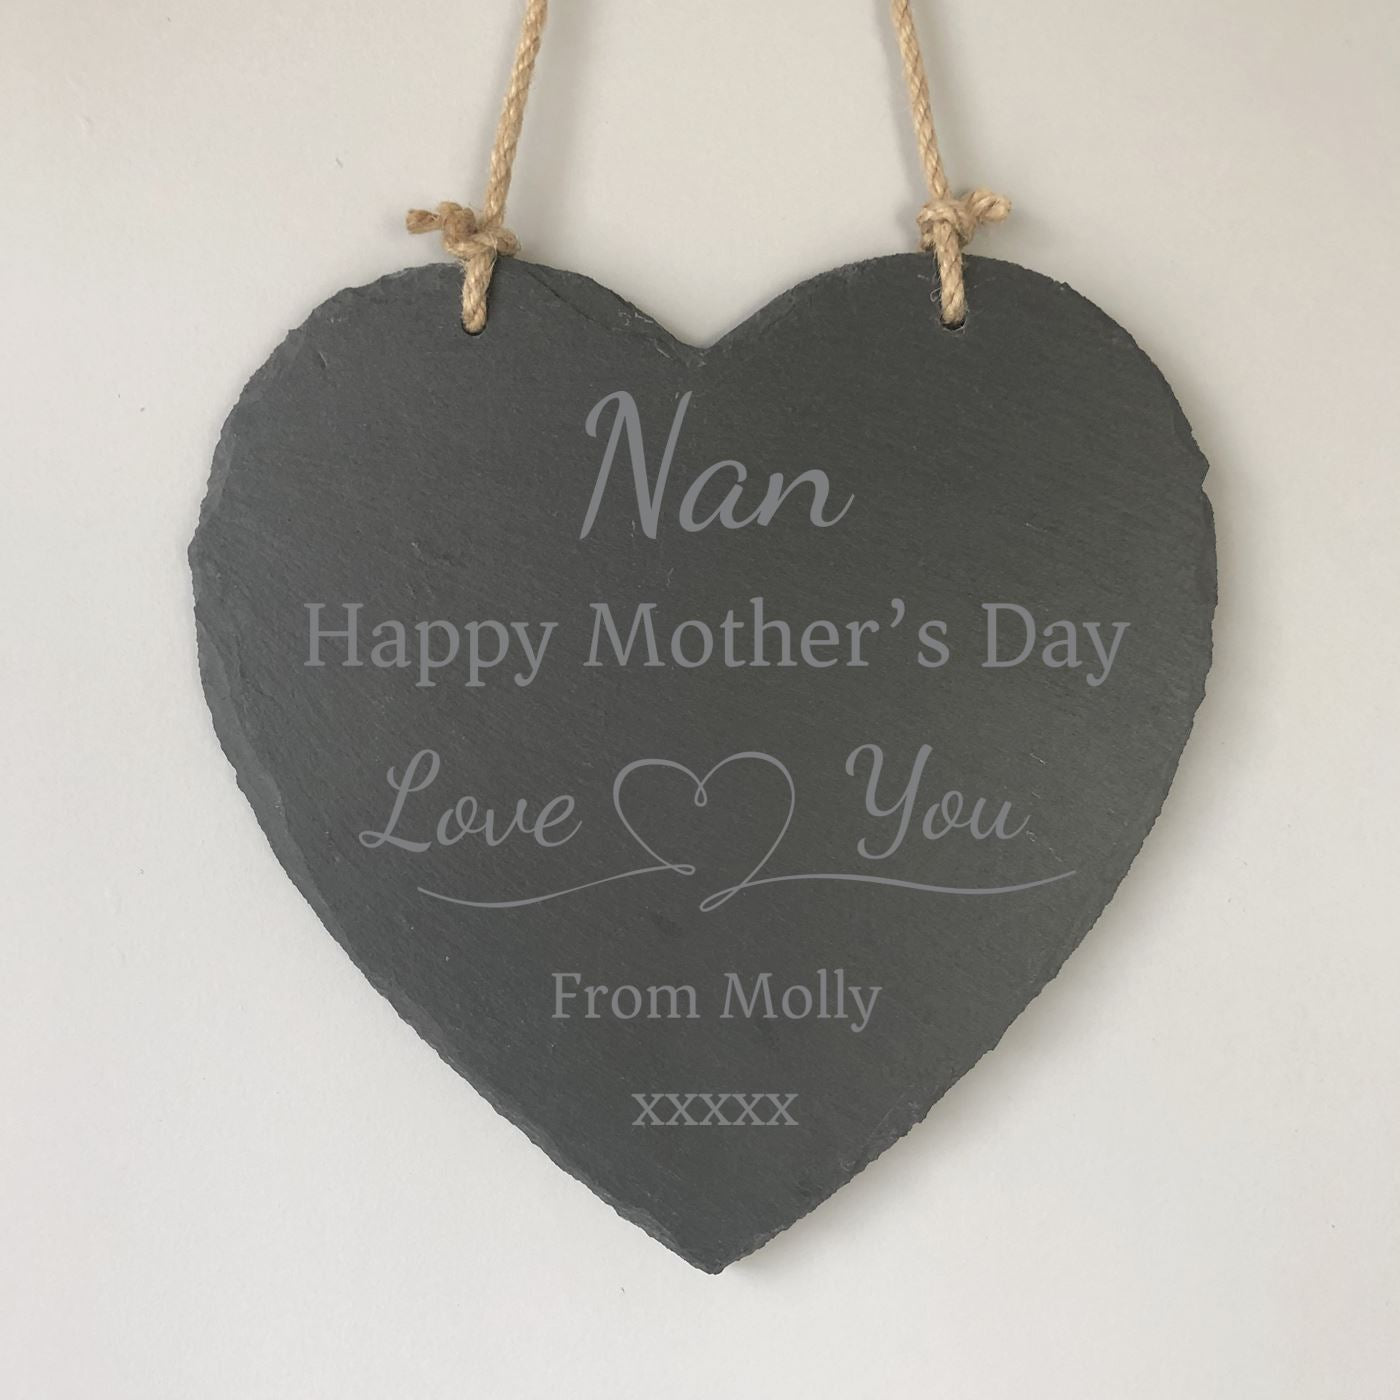 Personalised Slate Heart Plaque  - Happy Mother's Day